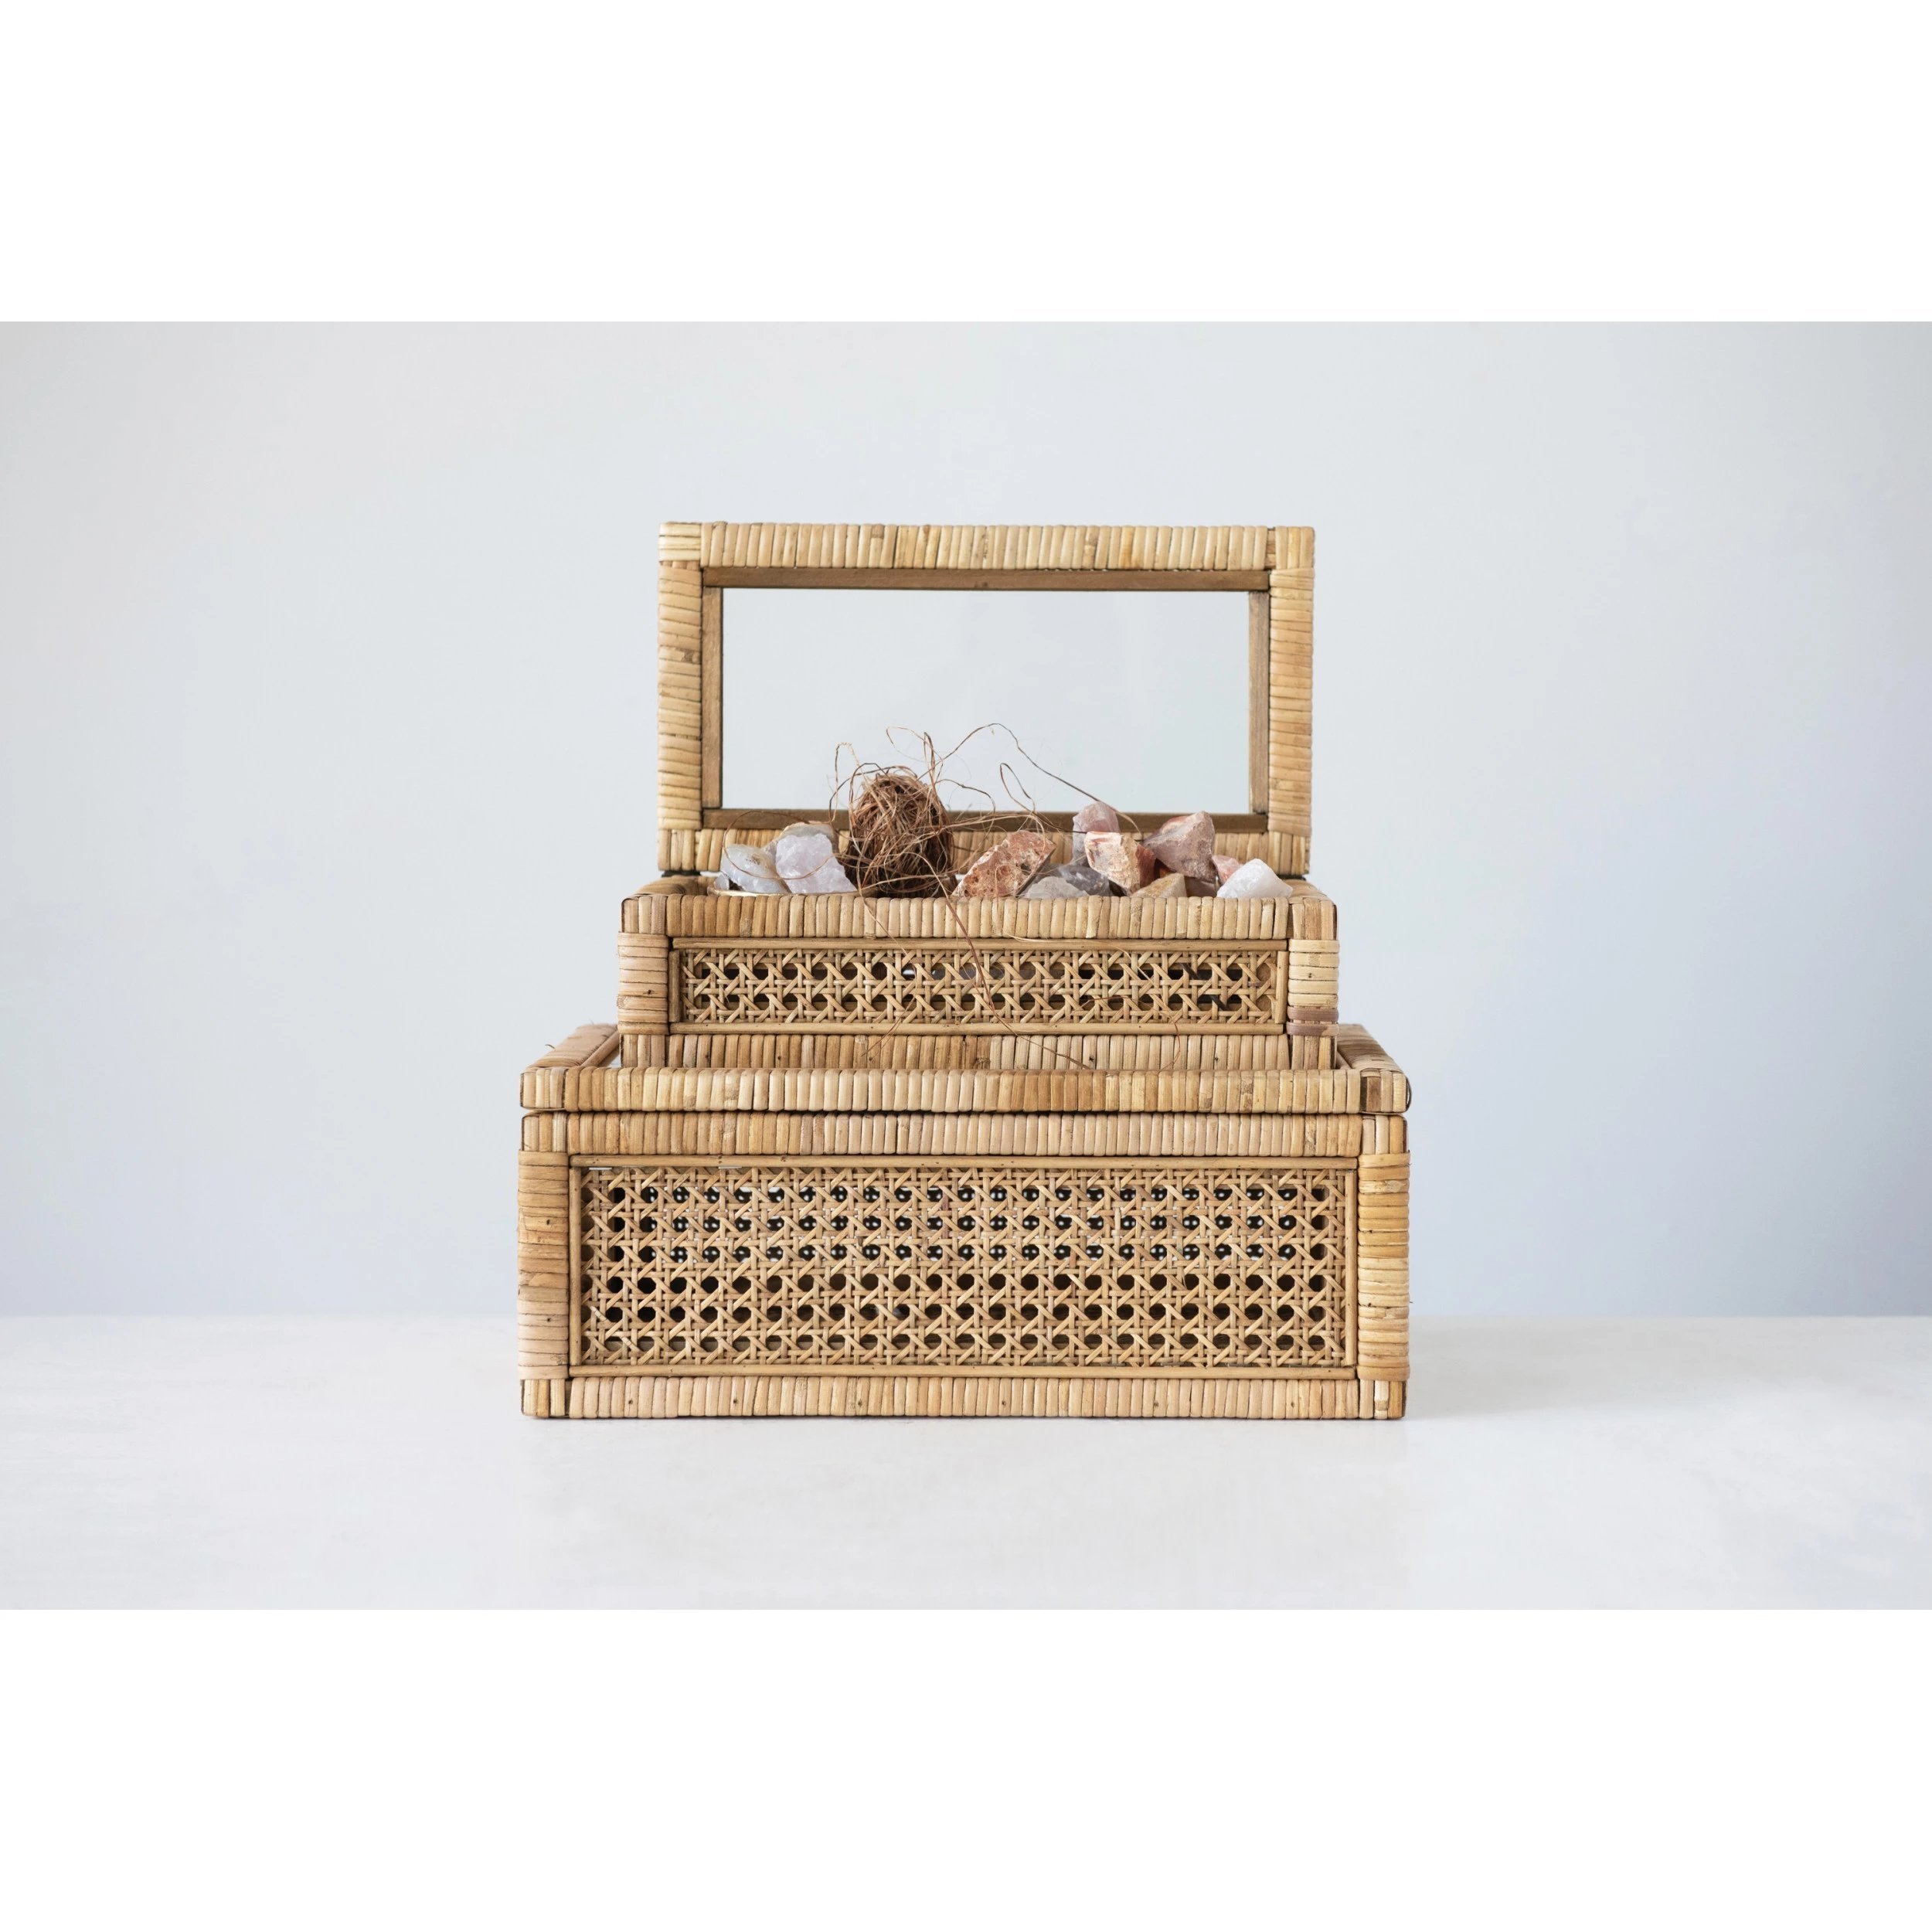 Woven Rattan Display Boxes with Glass Lids & Fir Wood Frame (Set of 2 Sizes) - Image 2